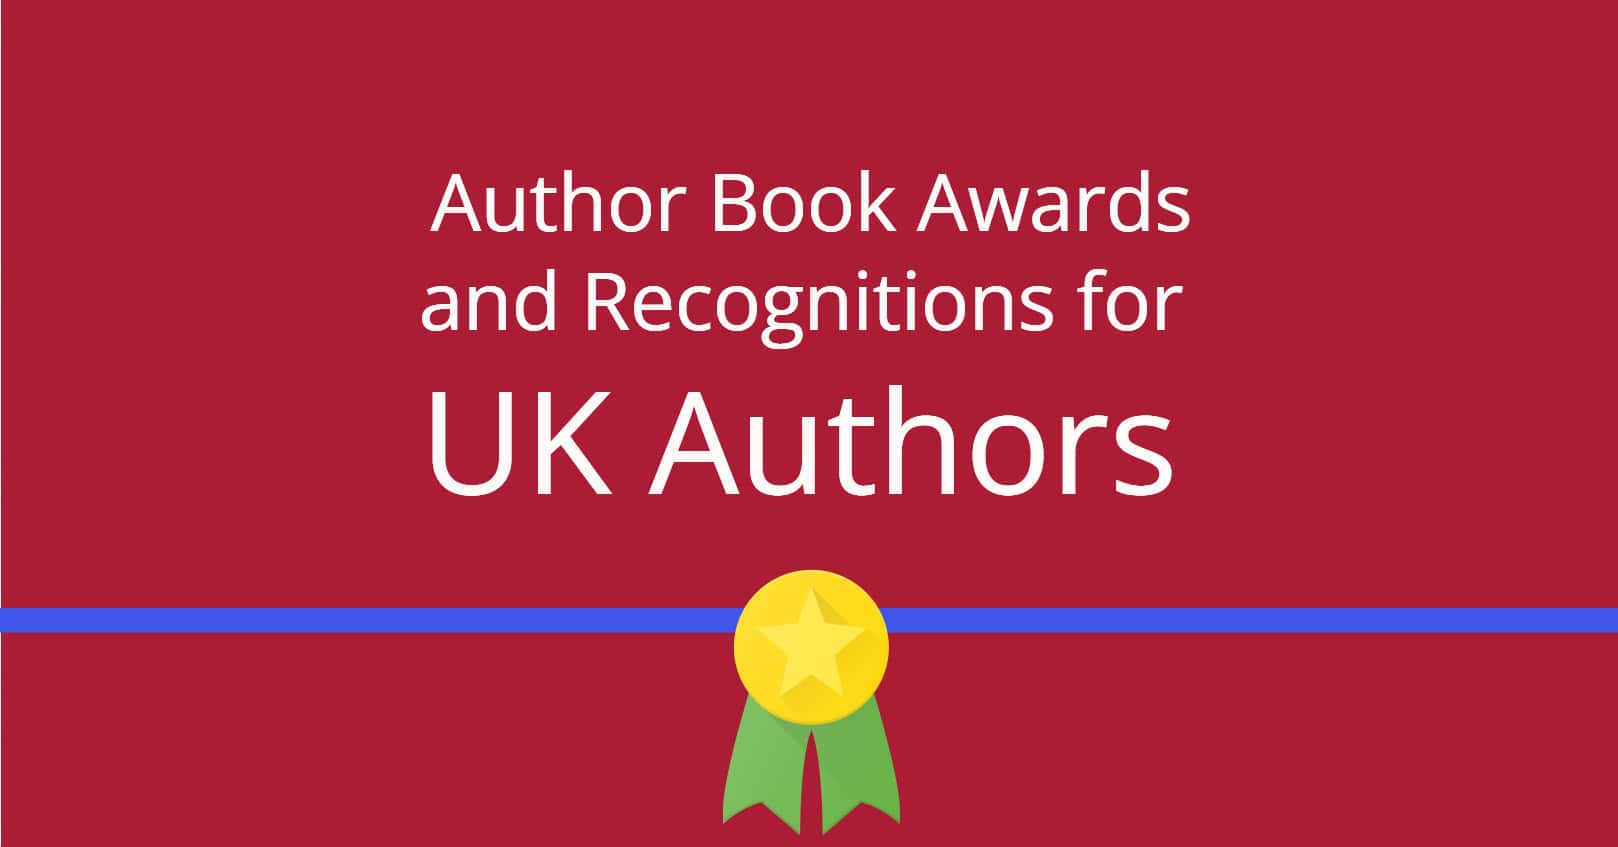 Author Book Awards and Recognitions for UK Authors